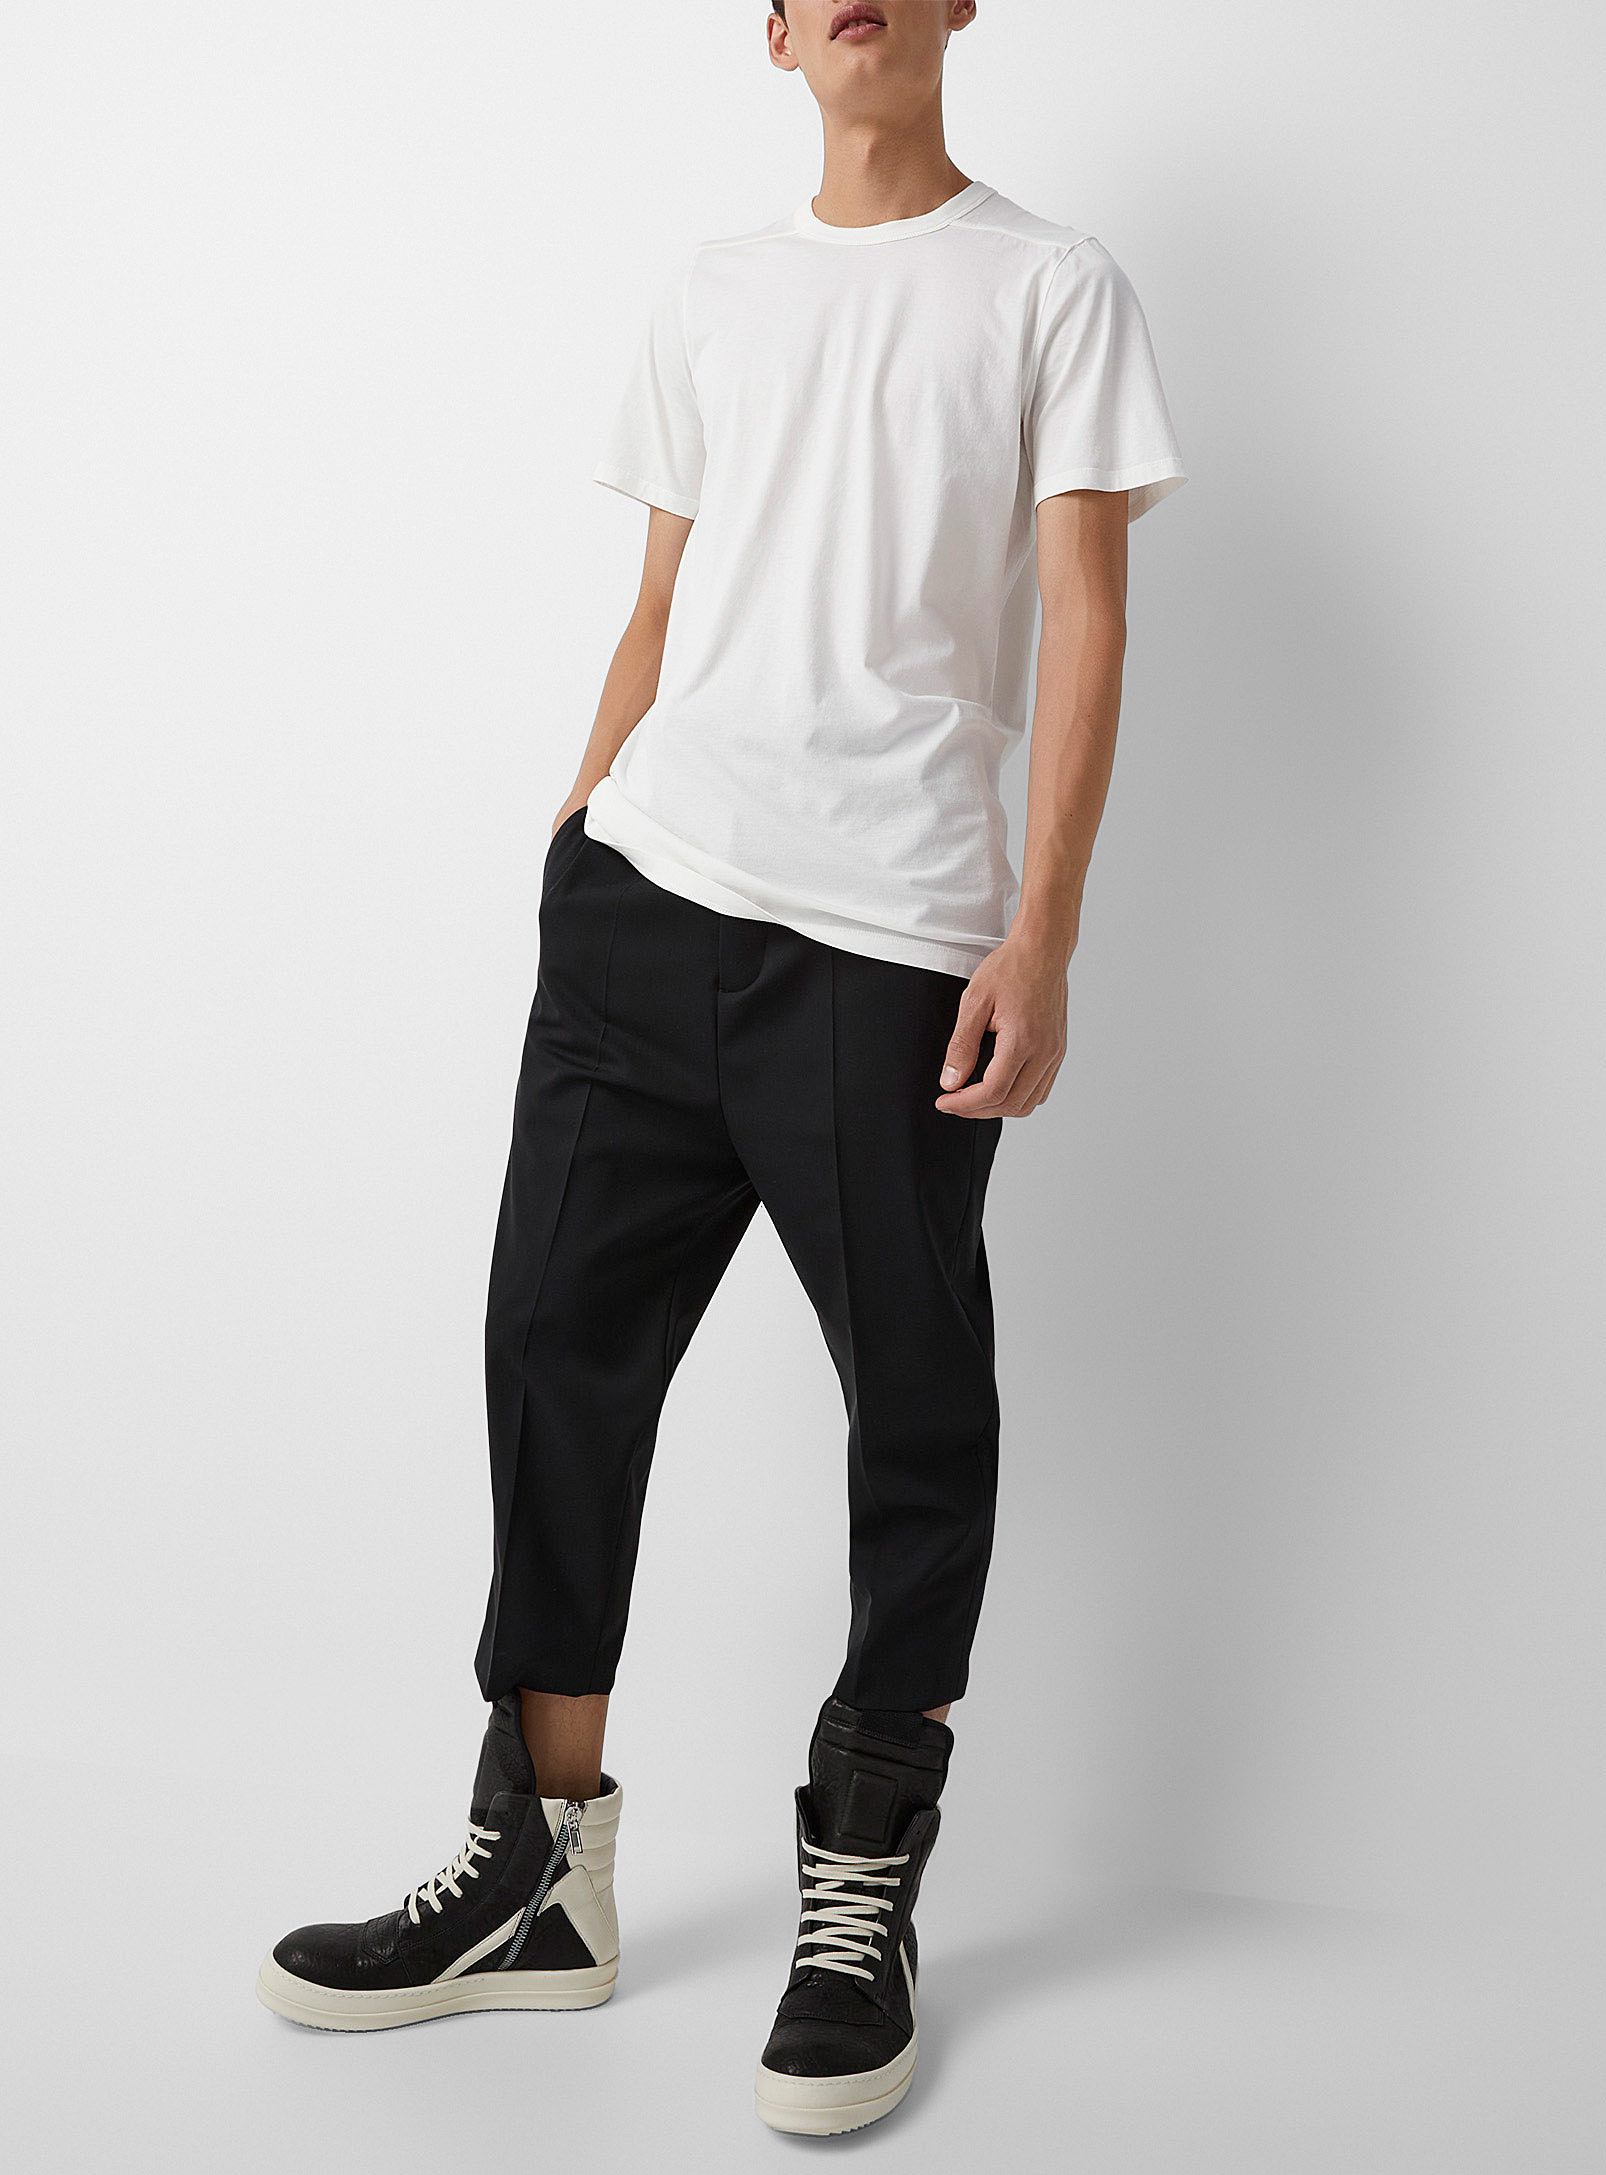 RICK OWENS ASTAIRE CROPPED PANT